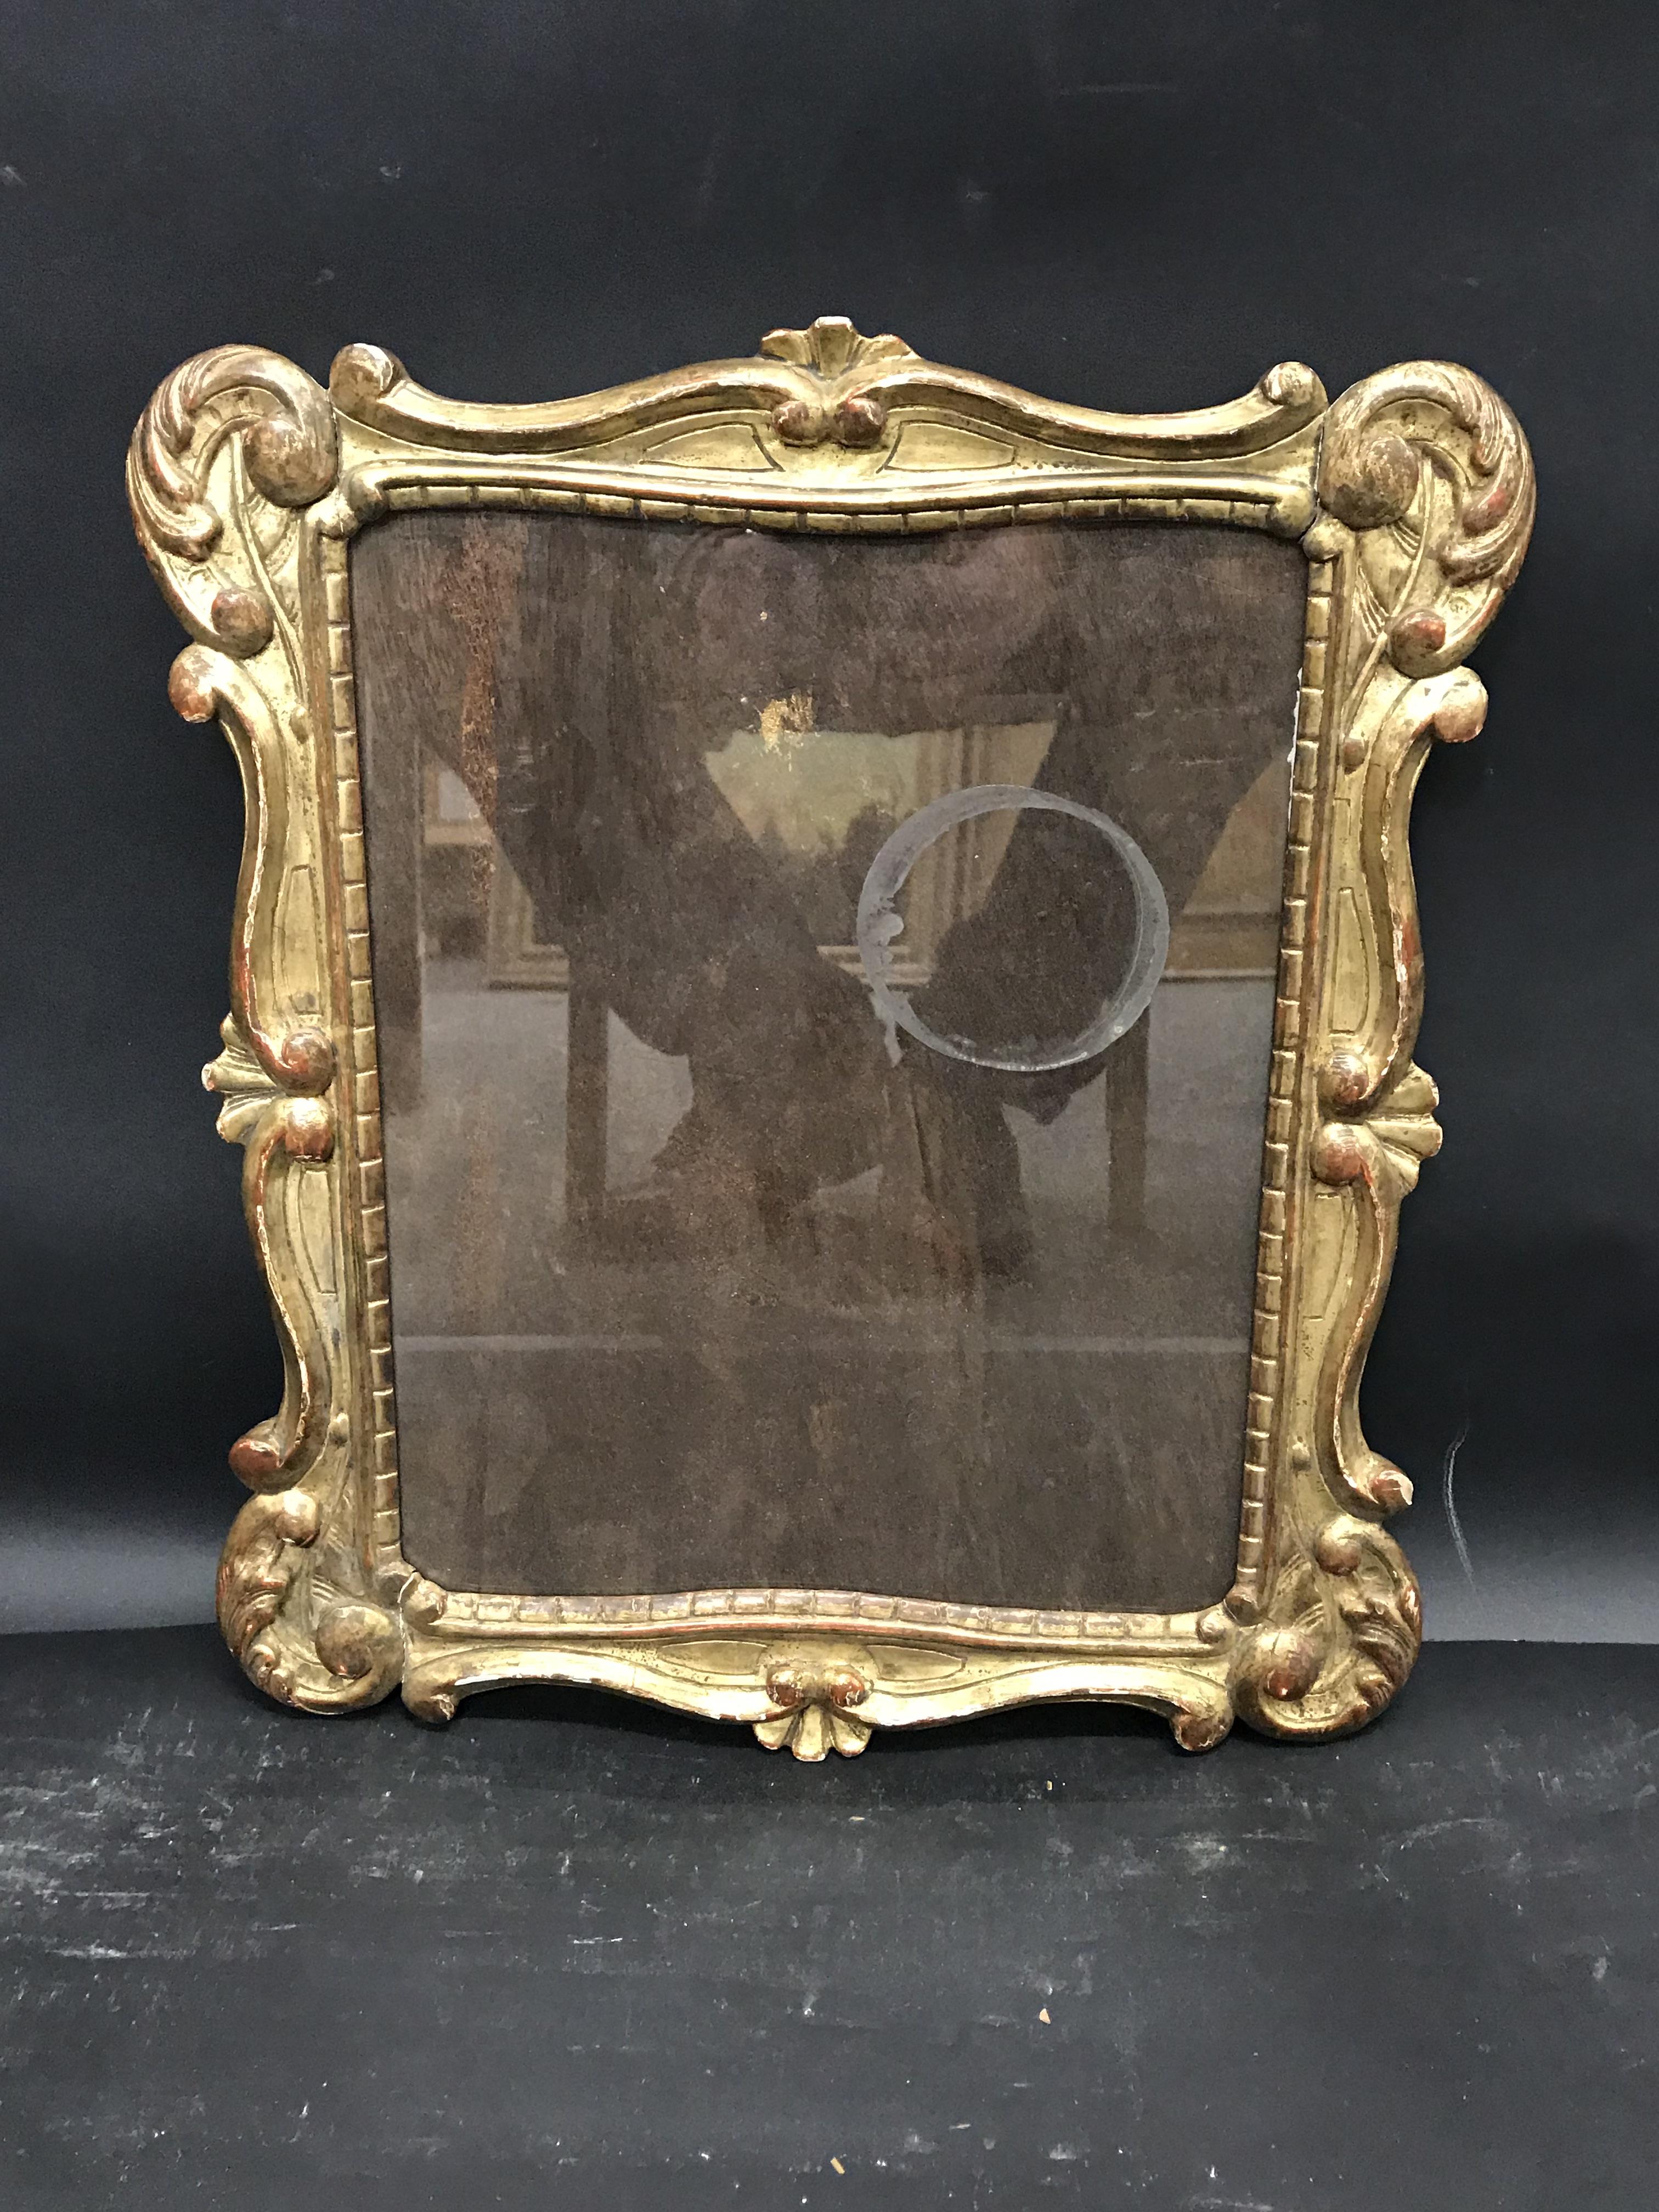 19th Century English School. A Carved Giltwood Frame, with Inset Glass, 12.5" x 10" (rebate). - Image 2 of 3